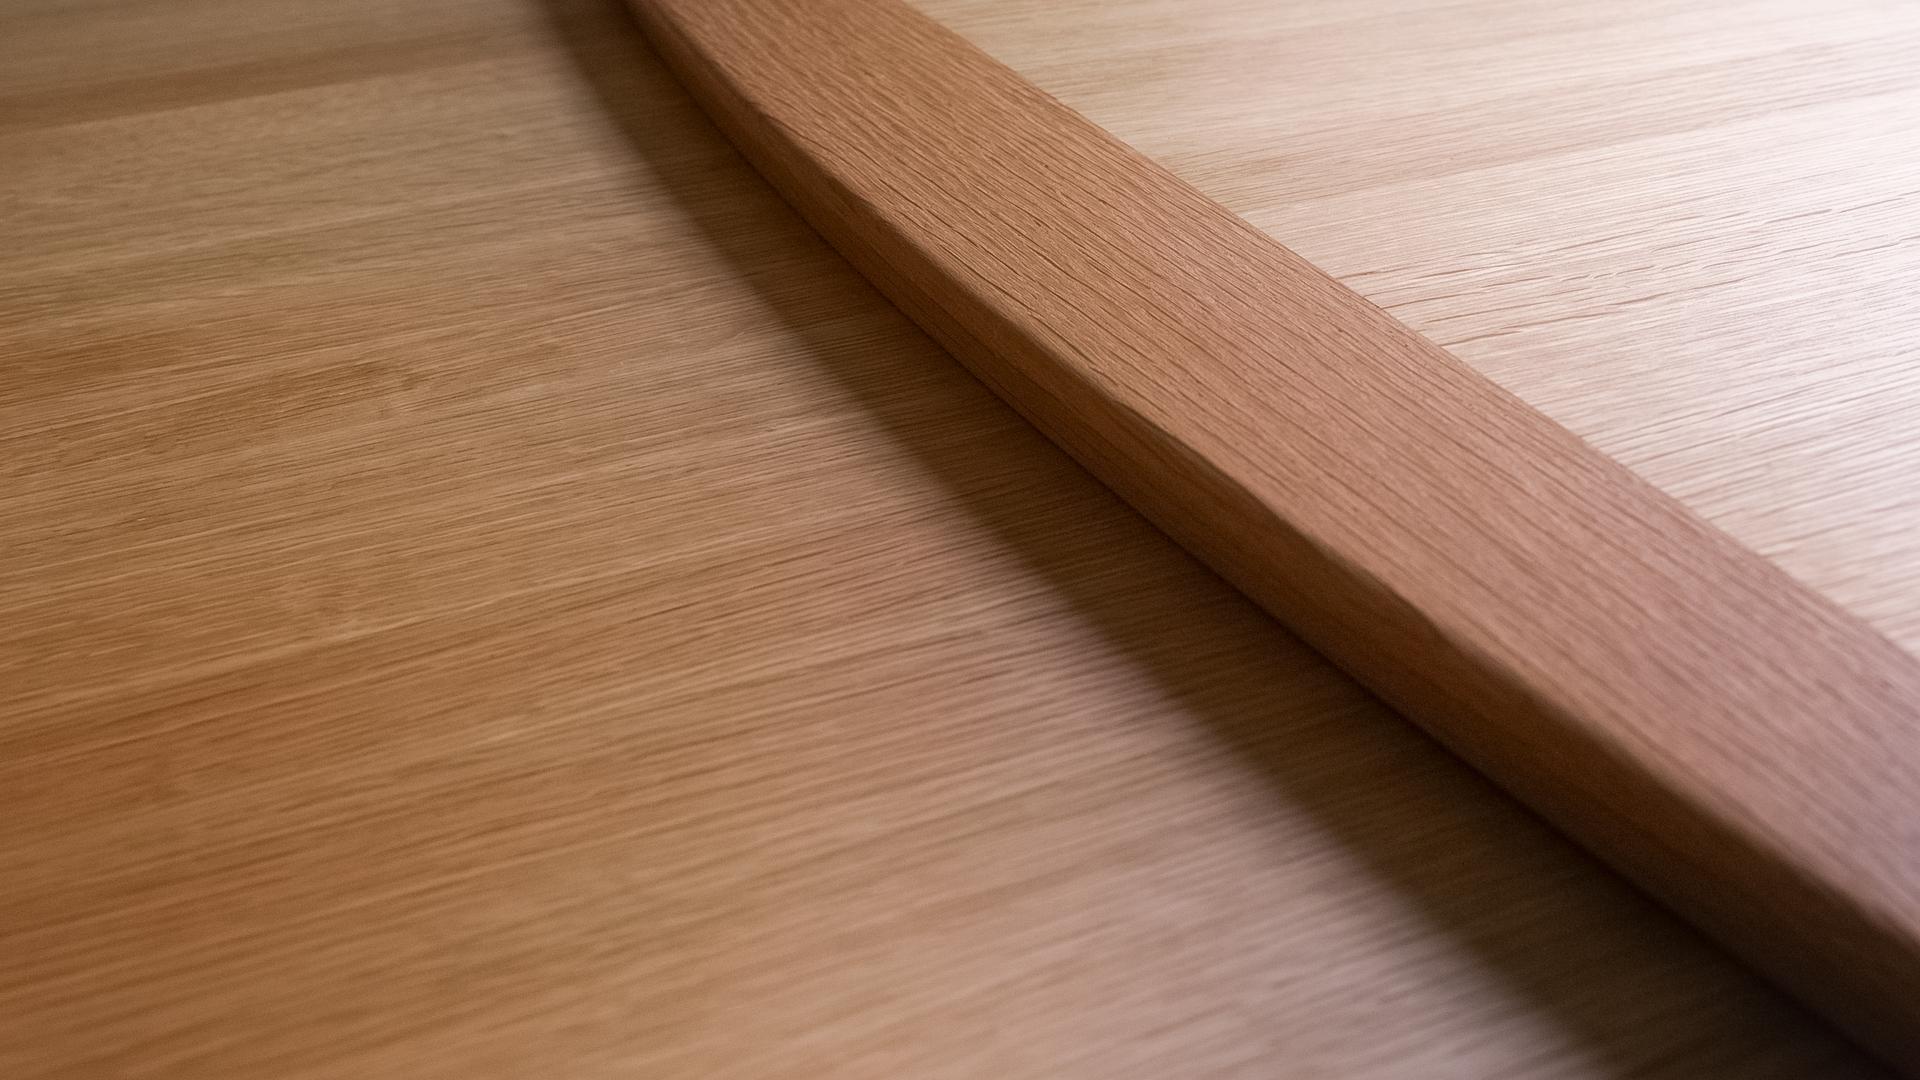 Smooth wooden tabletop